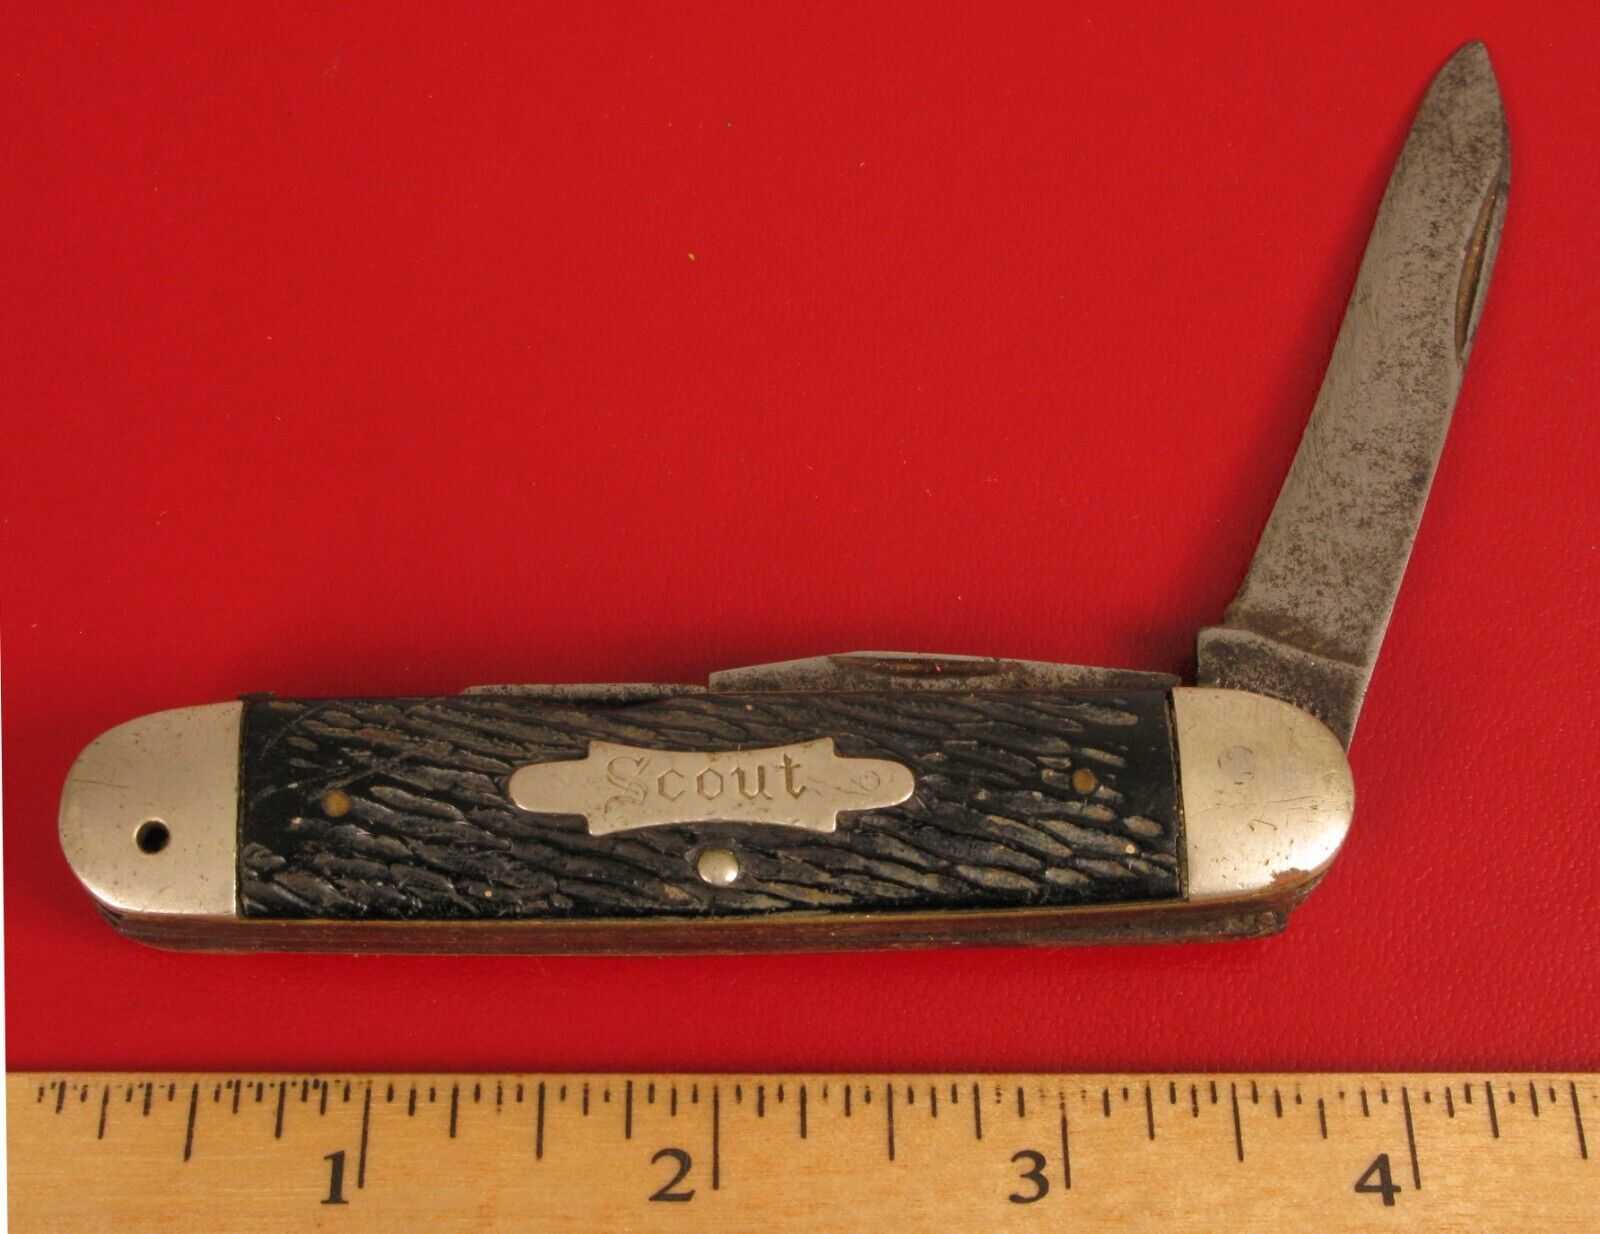 ANTIQUE USED IMPERIAL SCOUT POCKET KNIFE MADE IN USA 